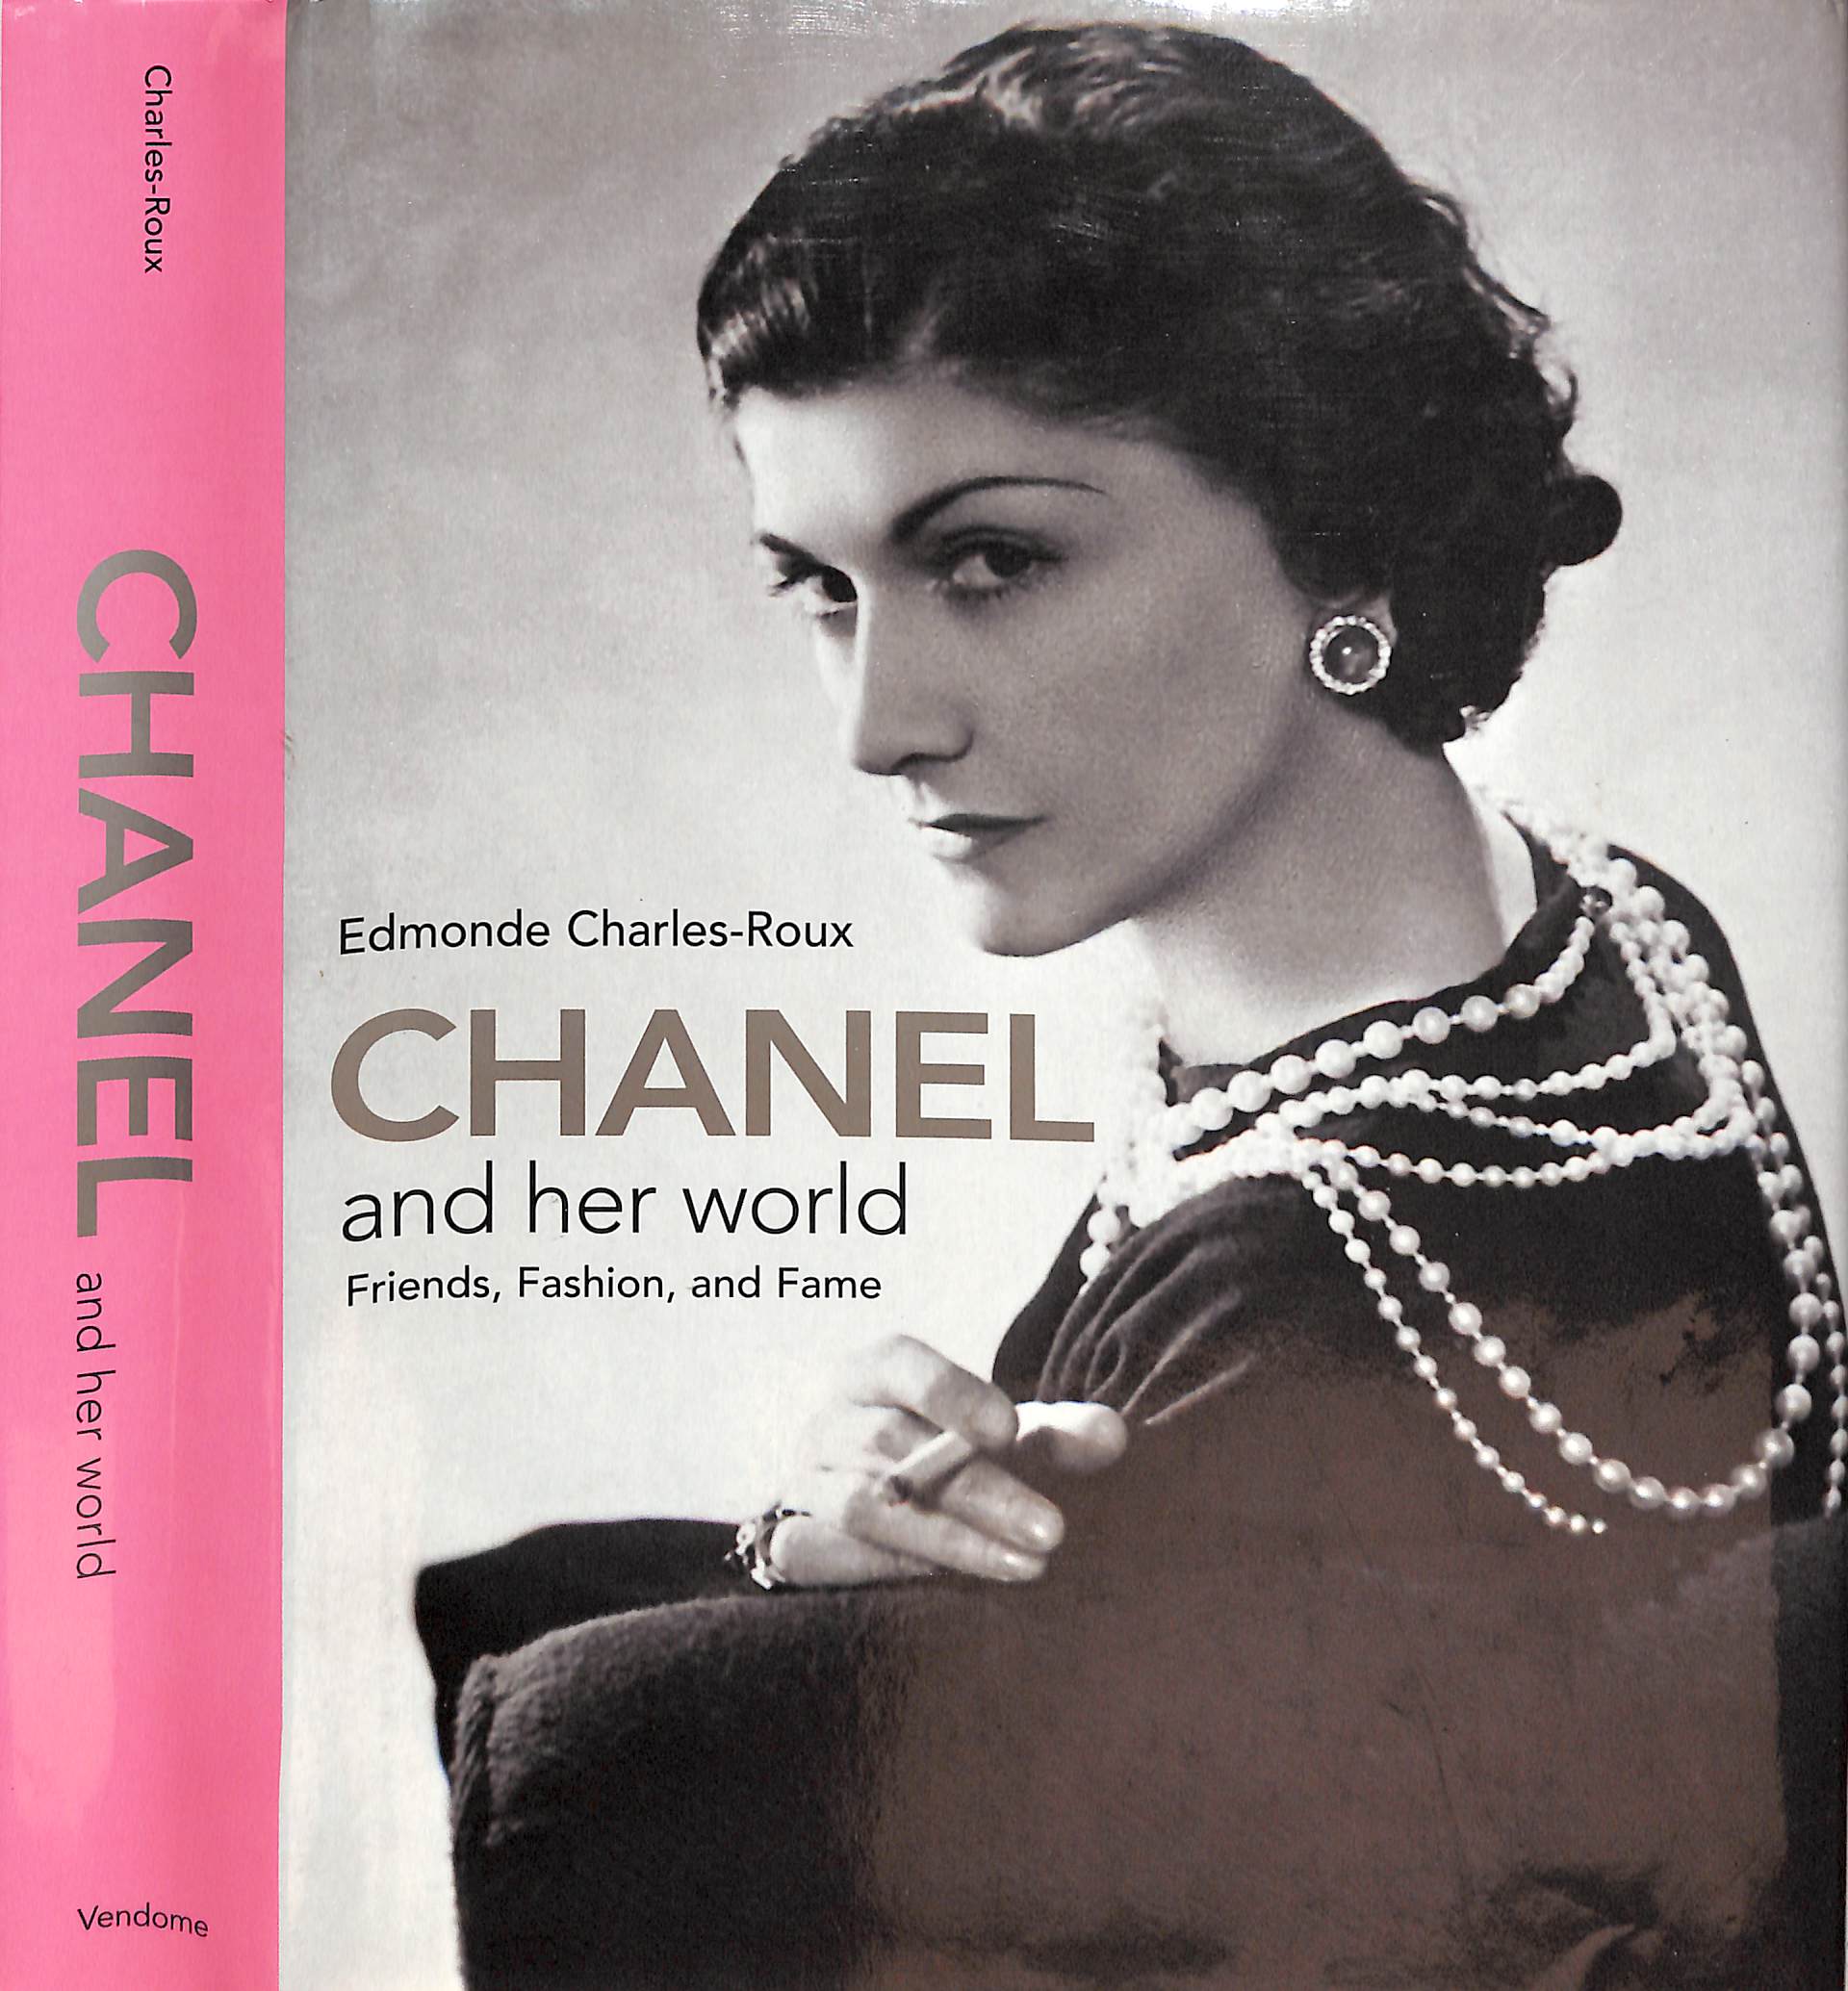 Chanel: new boutique in Vienna The Viennese Girl